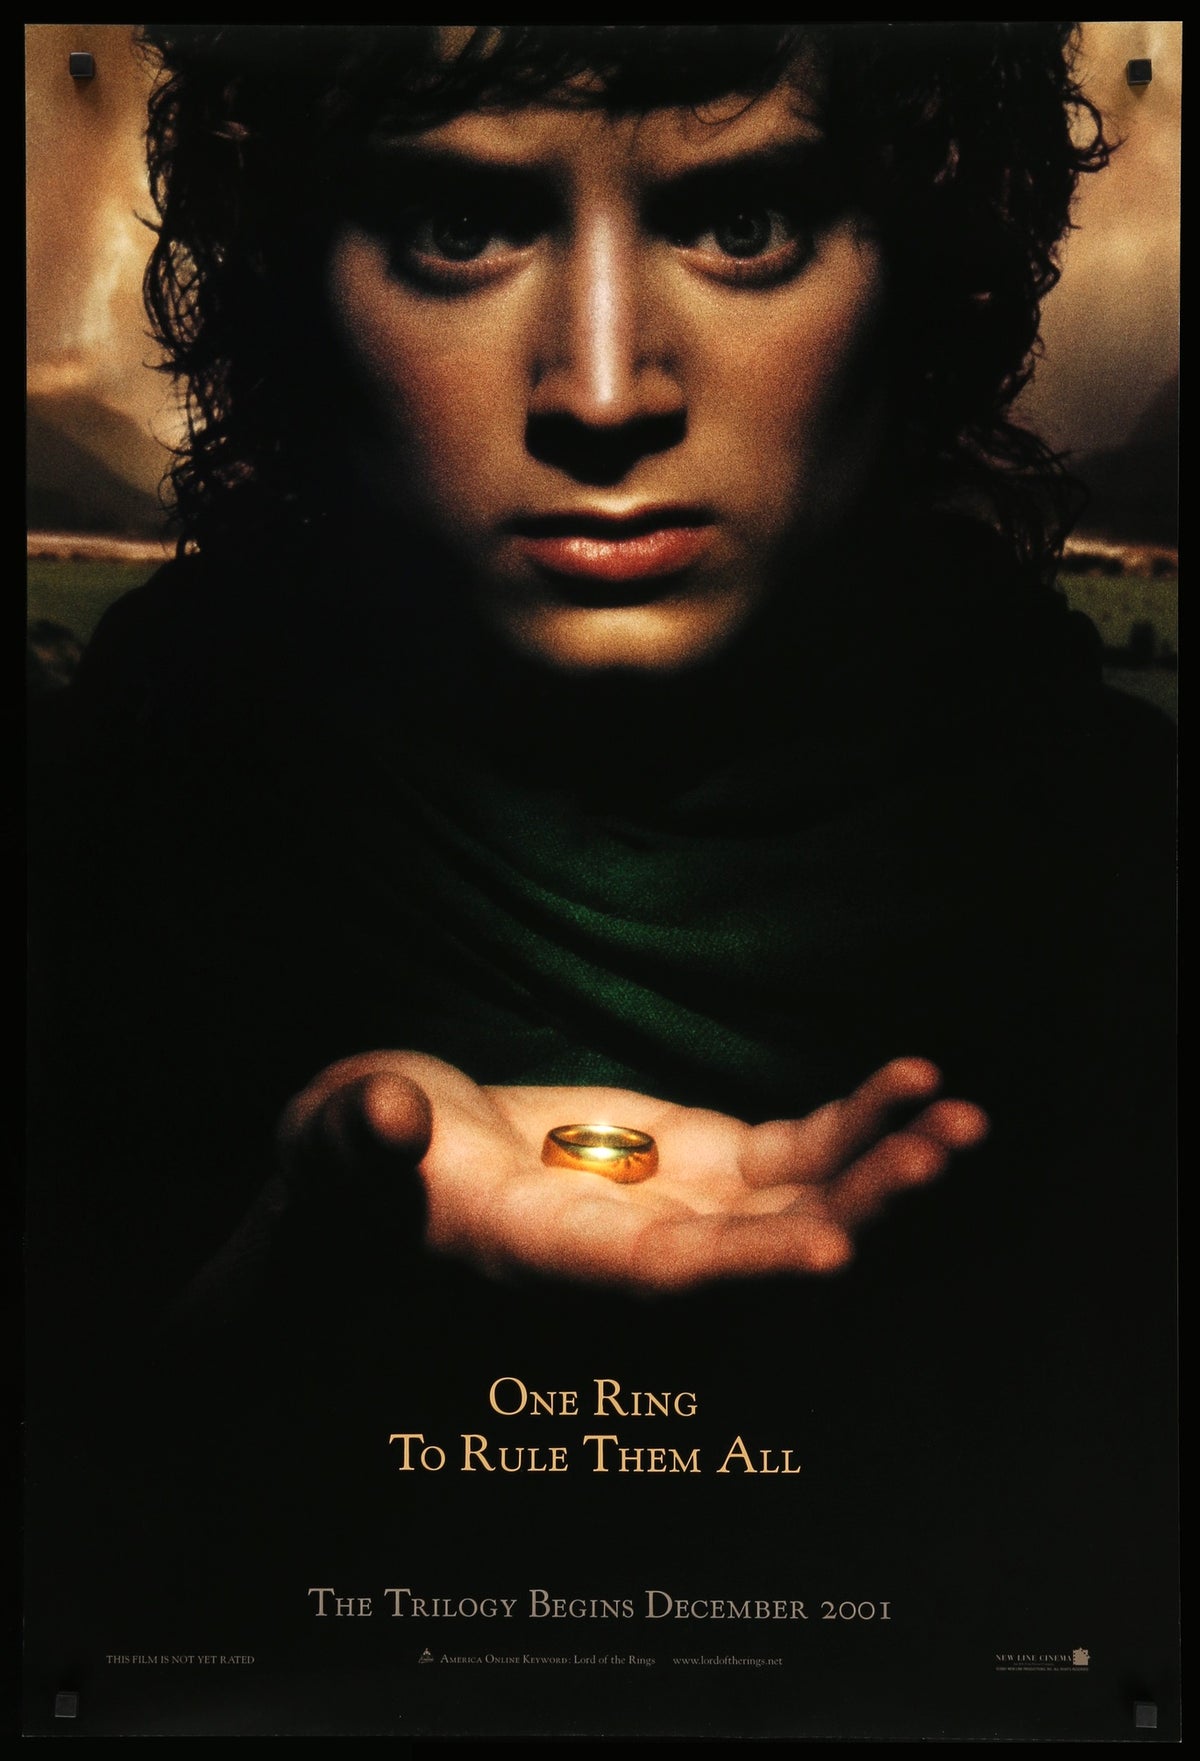 Lord of the Rings: The Fellowship of the Ring (2001) original movie poster for sale at Original Film Art